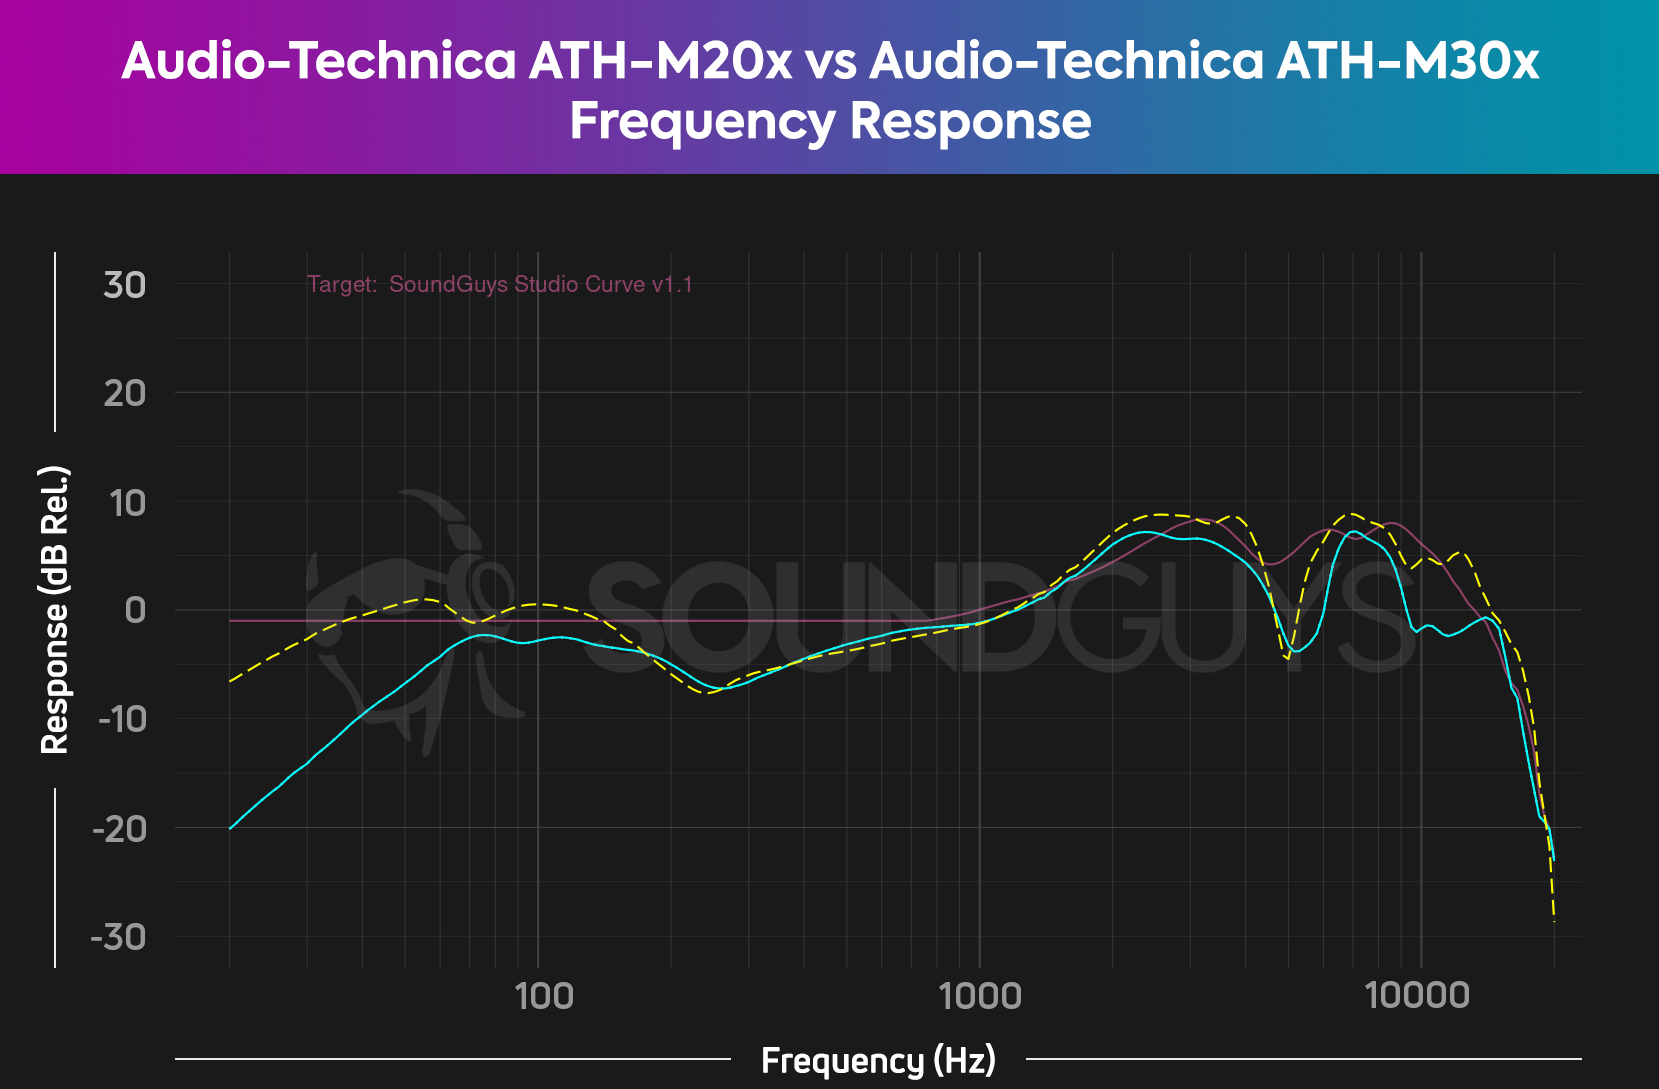 This chart compares the frequency responses of the Audio-Technica ATH-M20x and Audio ATH-M30x against our target curve.